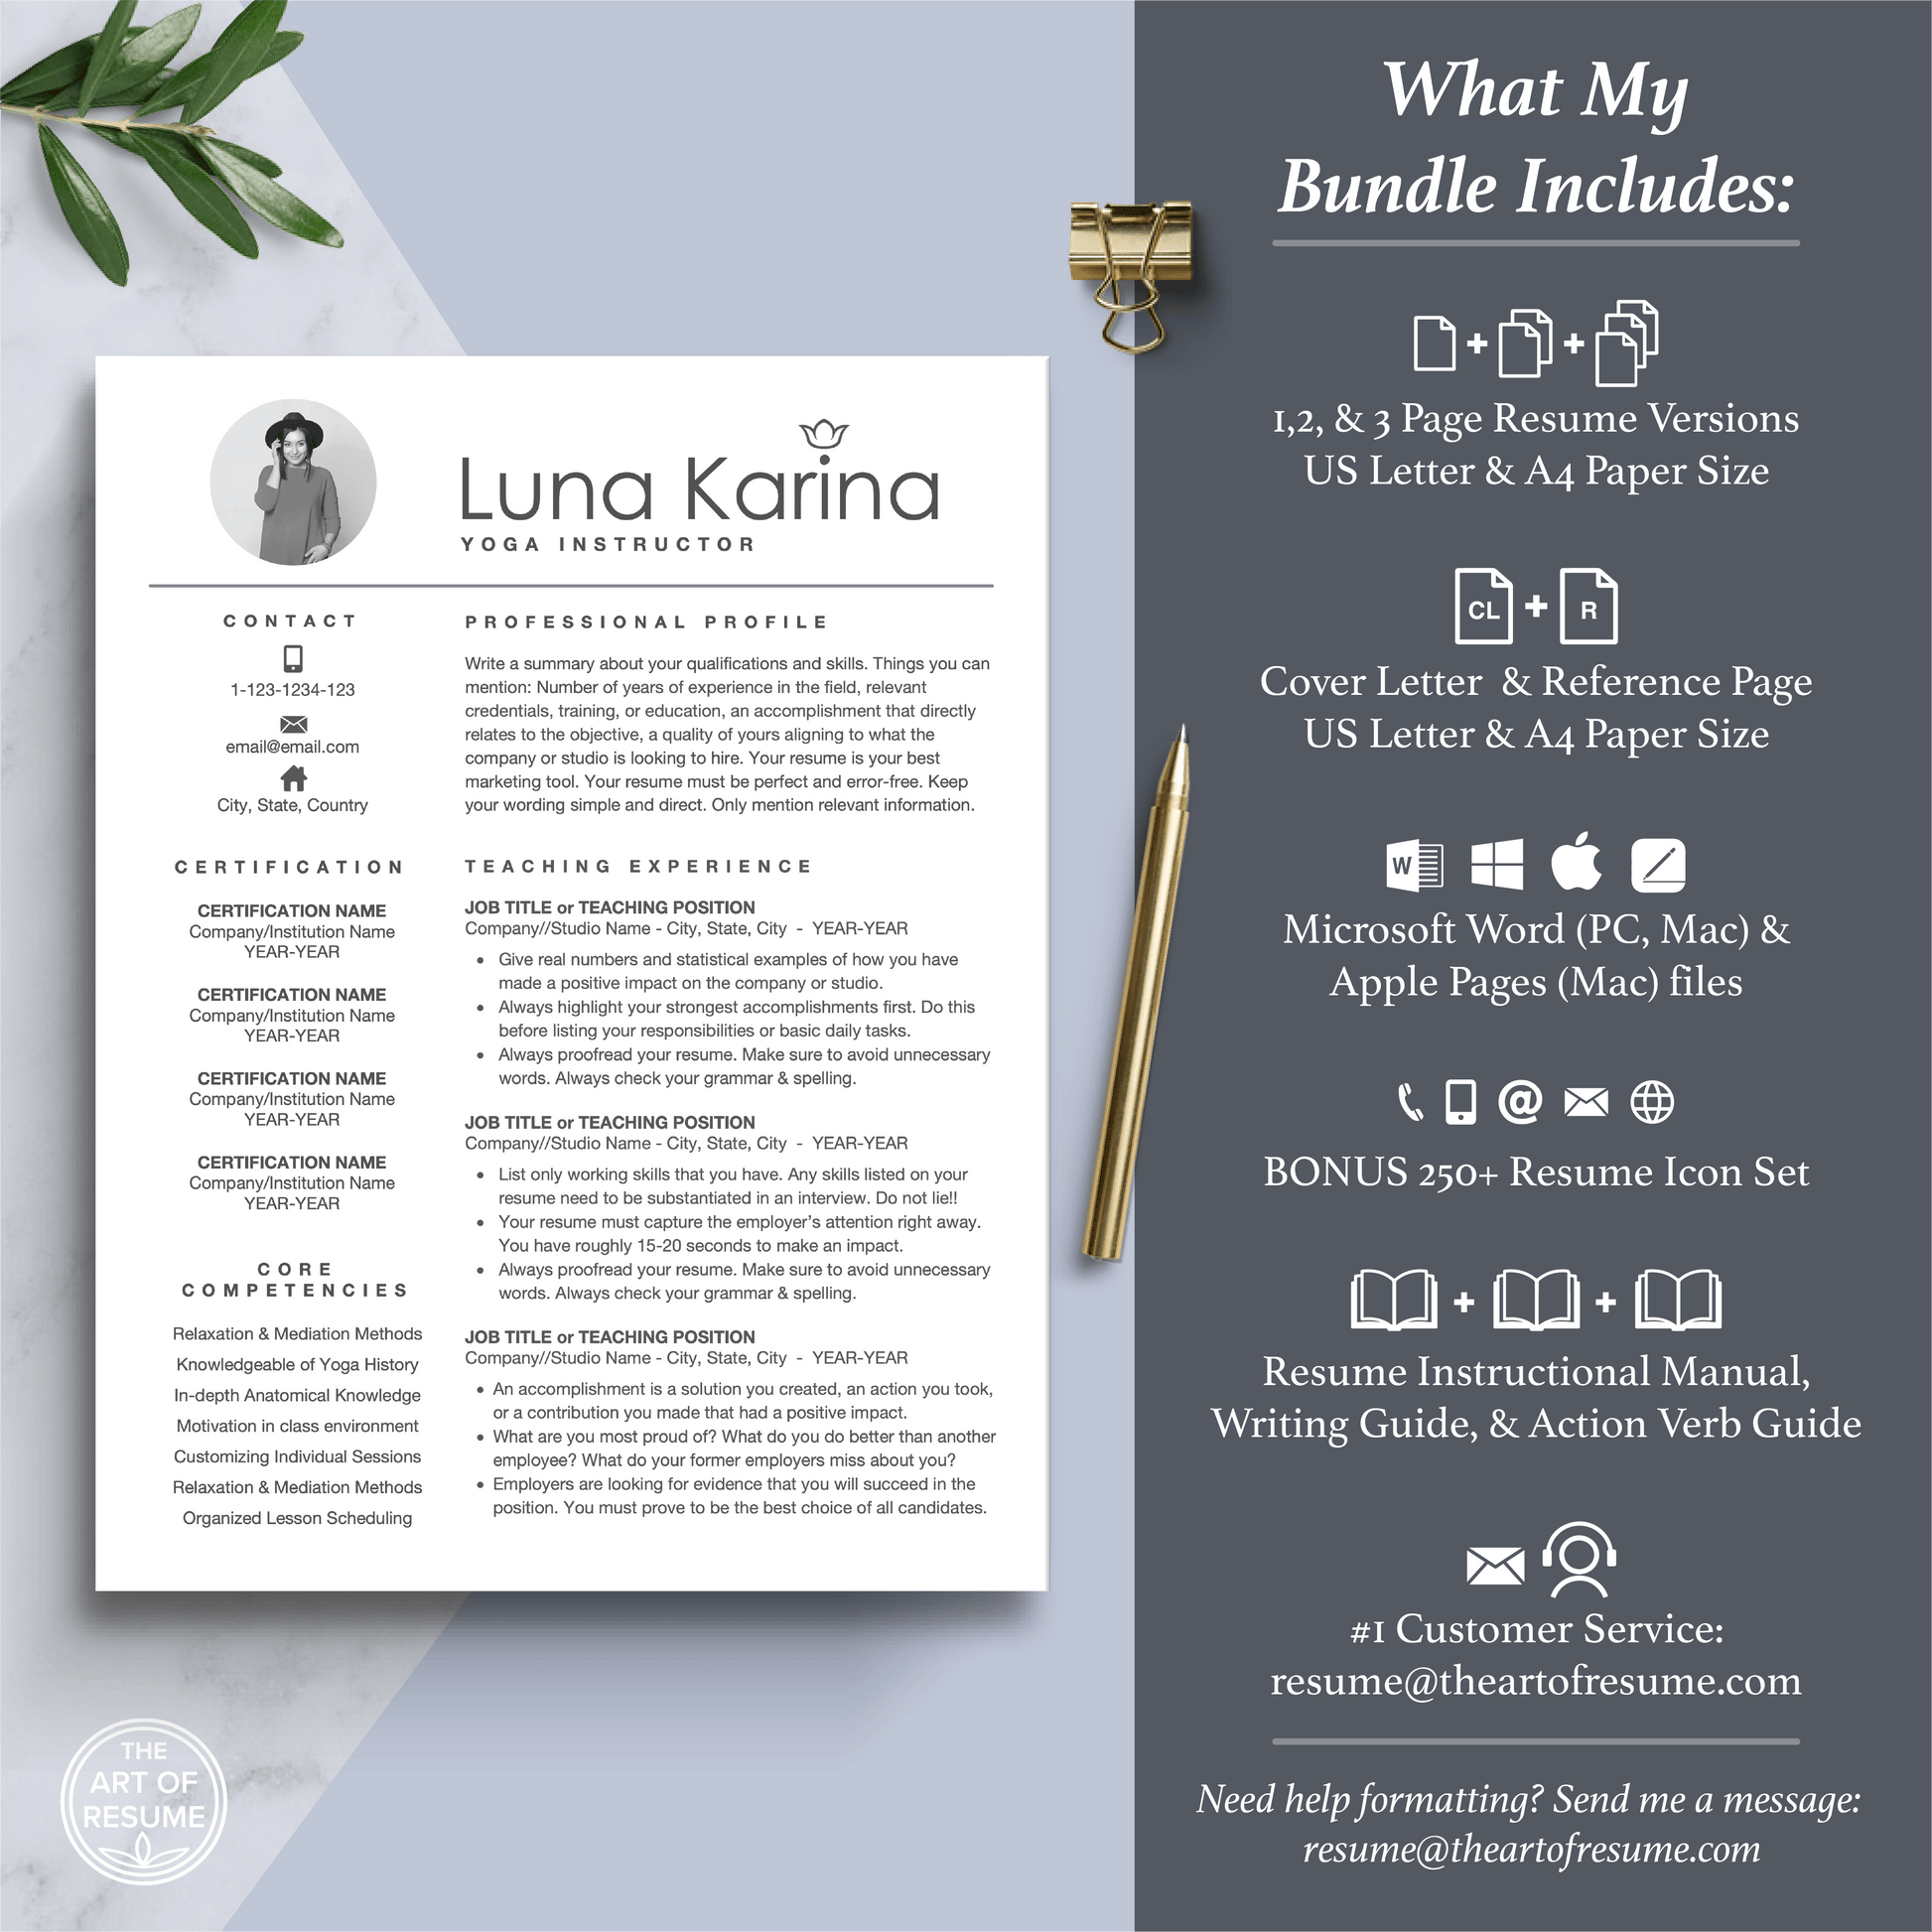 The Art of Resume Templates | Professional Professional Yoga, Fitness, Wellness, Designer  Resume CV Template Includes 3 Editable Resume Templates, Cover Letter, Reference Page, Mac, PC, A4 Paper, US size, Free Guide, The Art of Resume Writing, 250 Bonus Resume Icons